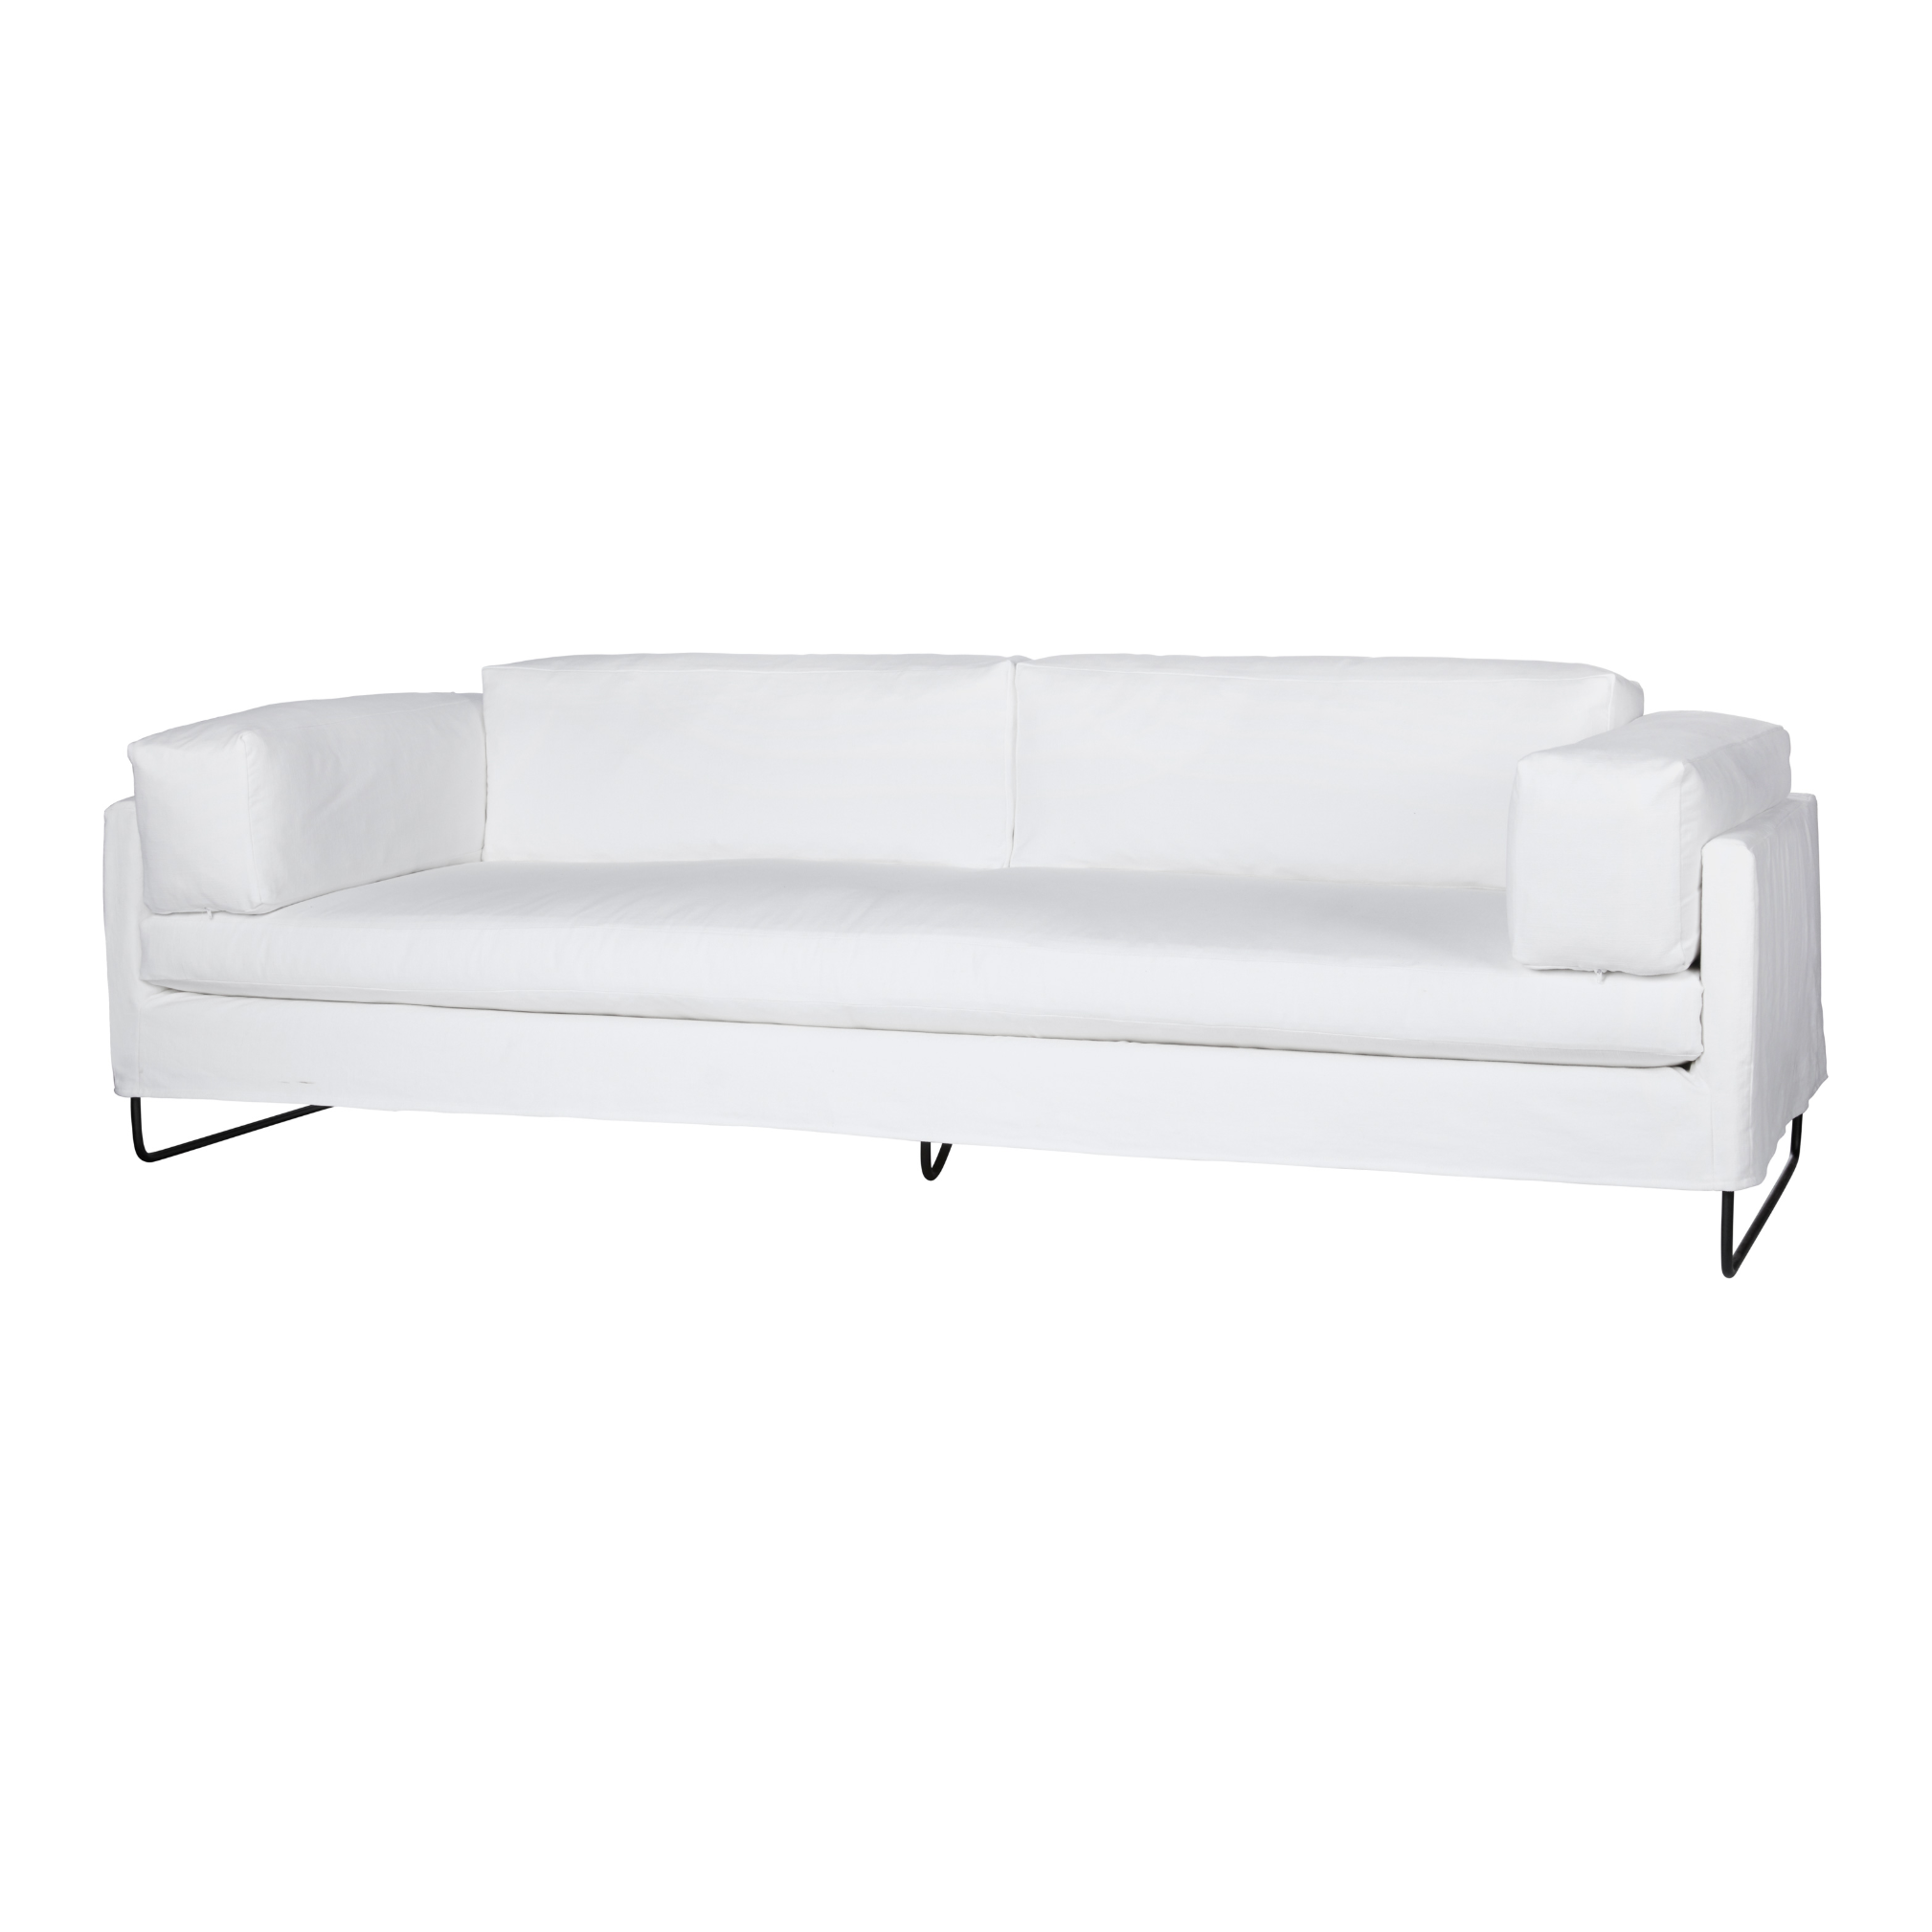 The gorgeous Allister slipcovered sofa by Cisco Brothers is chic and dreamy. The chunky pillows are so much fun with this silhouette. This sofa is photographed in Molino White fabric.  Dimensions: 101"w X 40"d X 24"h Seat dimensions: 77"w X 27"d  Support: webbing, stitch: Blind Leg: Base-metal  Note: Feather & Down included upon a black rust metal base